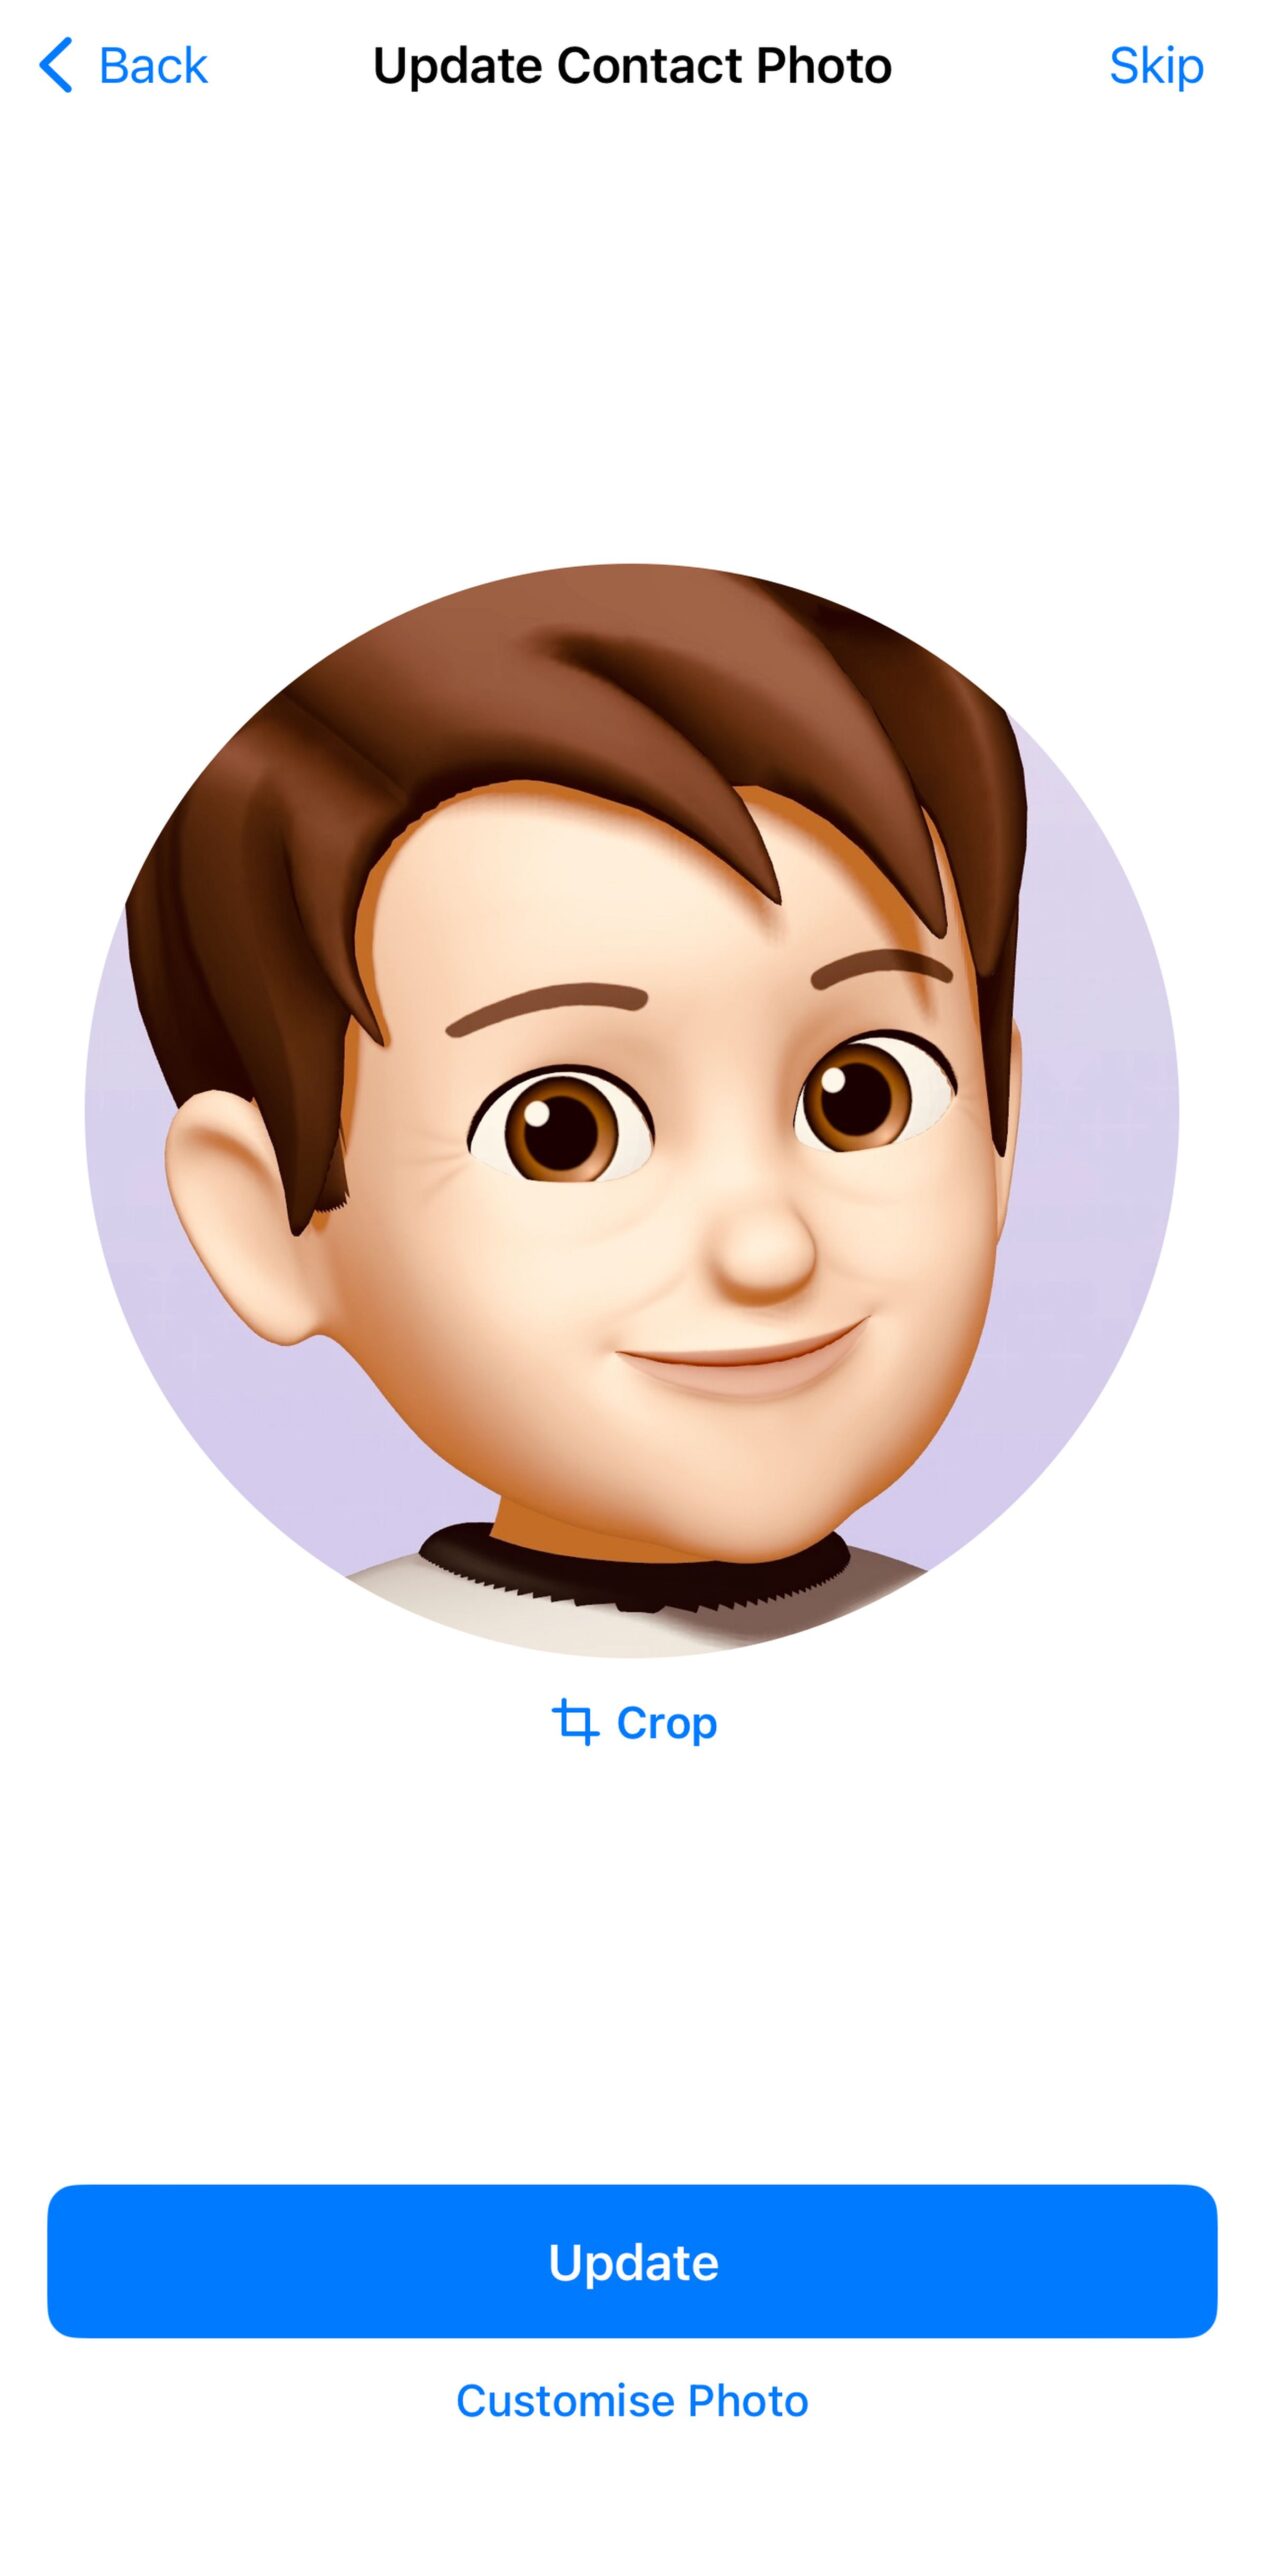 A circle with an image of a boy with brown eyes and hair and an update button below that.